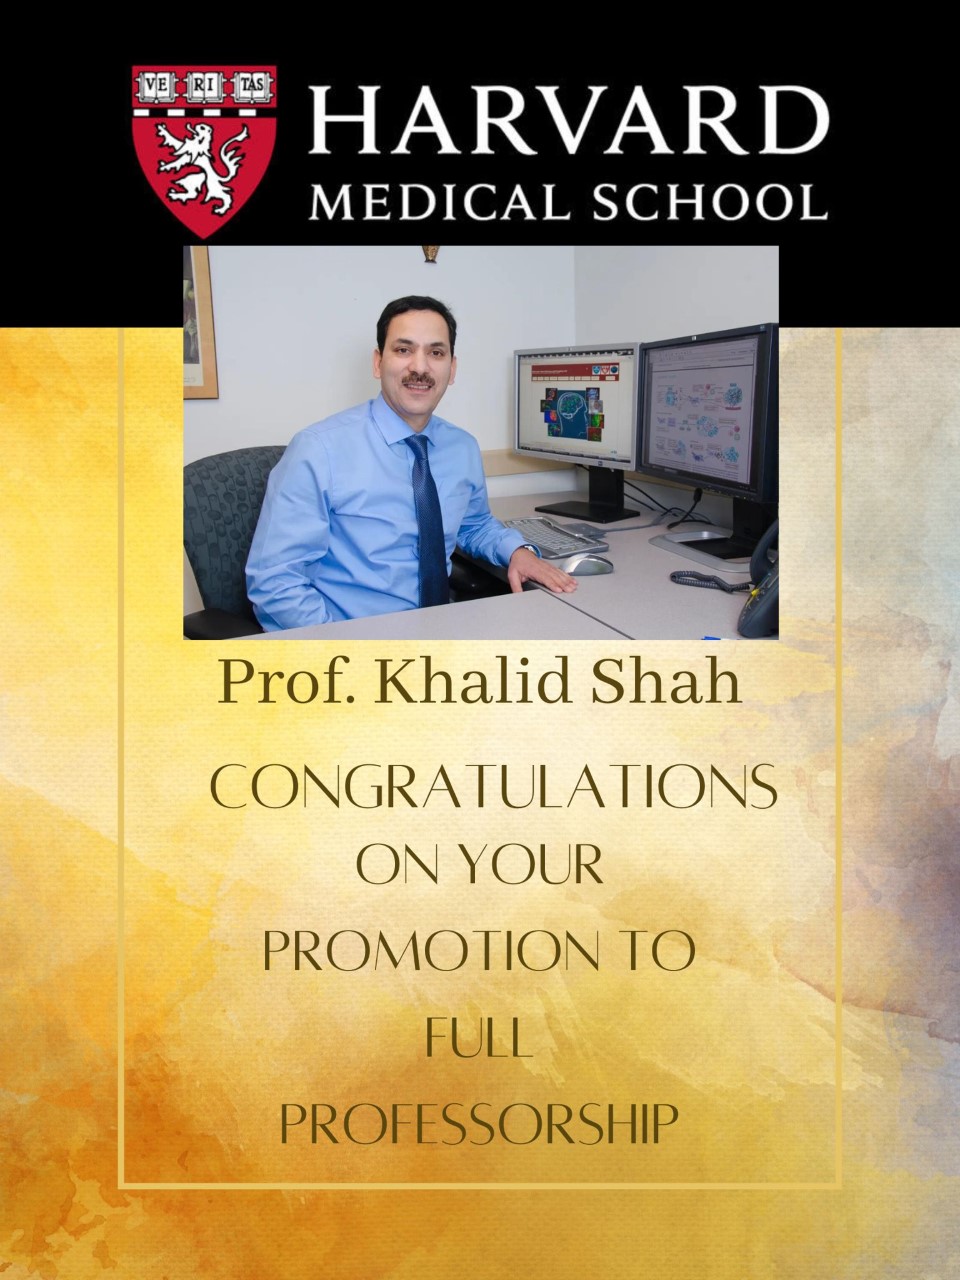 Congratulations to Dr. Khalid Shah on the Promotion to Harvard Full Professorship